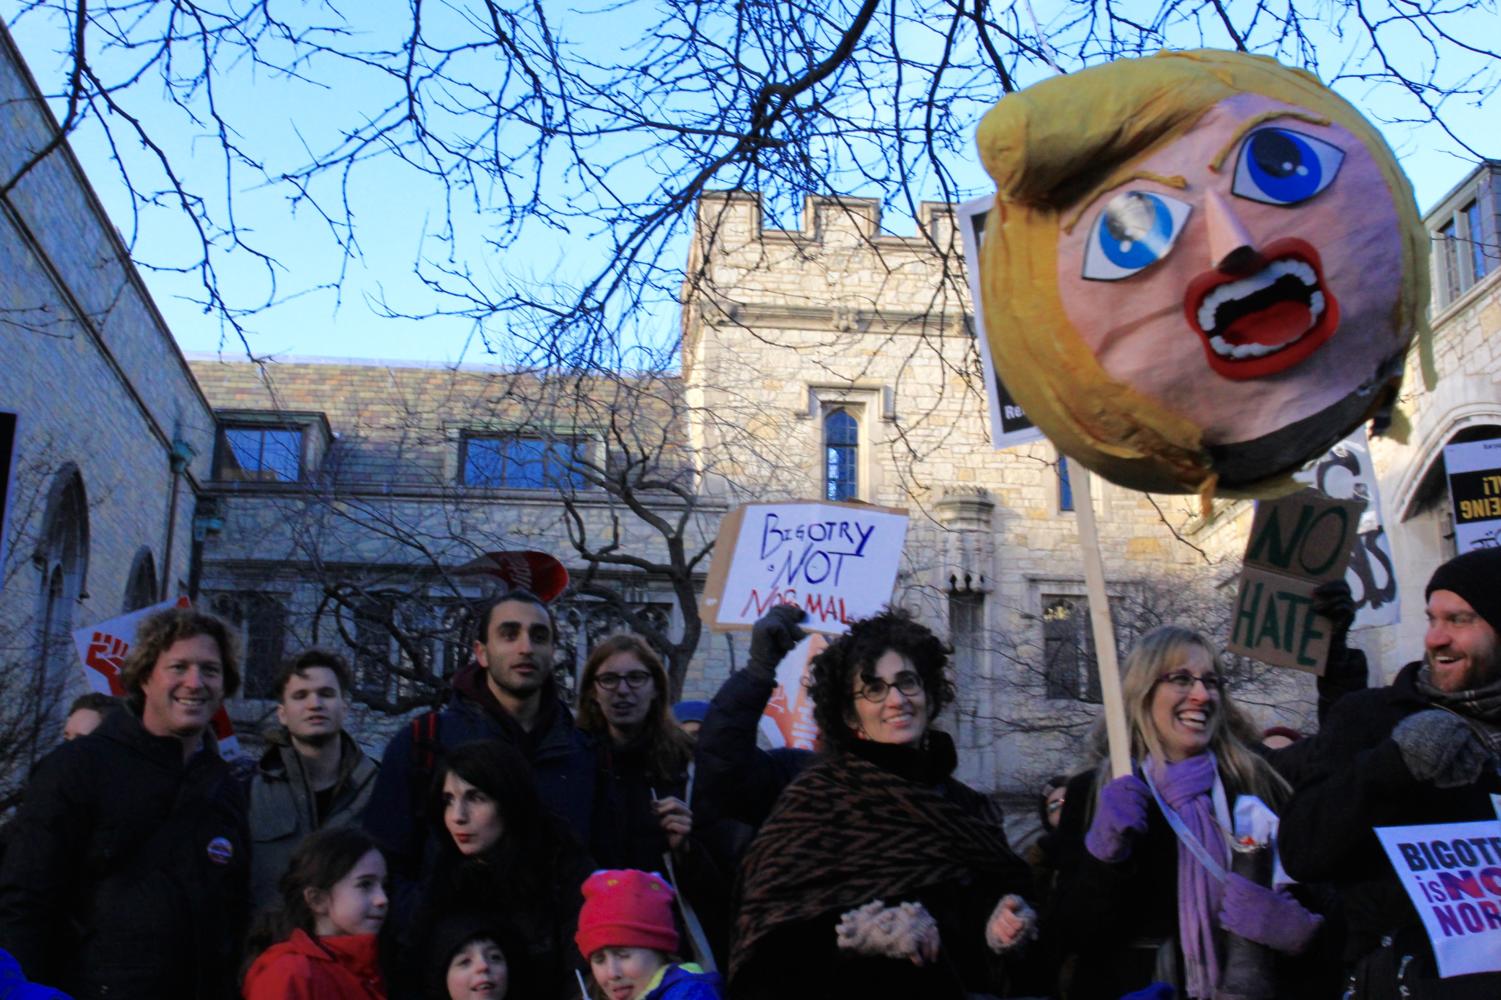 After kids broke a piñata that represented Donald Trump by hitting it with a long stick, the head of the piñata hung in front of the protesters.